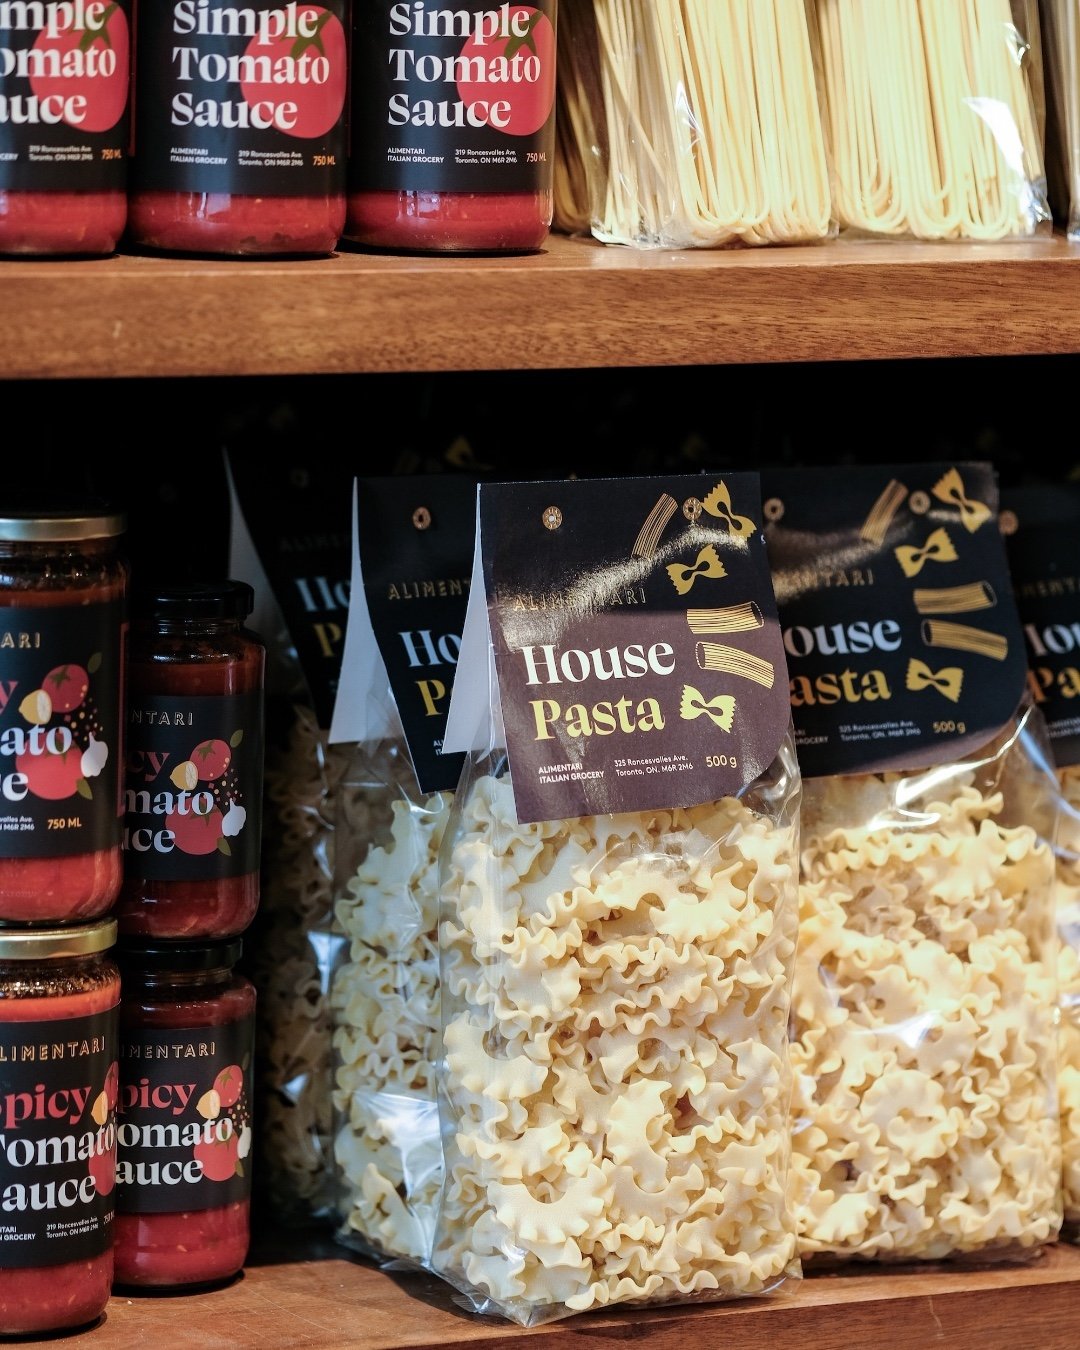 Were you thinking of UberEatsing tonight? We get it, it&rsquo;s convenient and easy. But so is grabbing a bag of pasta and one of our premade sauces. Just saying ;) 

#alimentaritoronto #roncy #roncesvallesvillage #torontofood #torontoeats